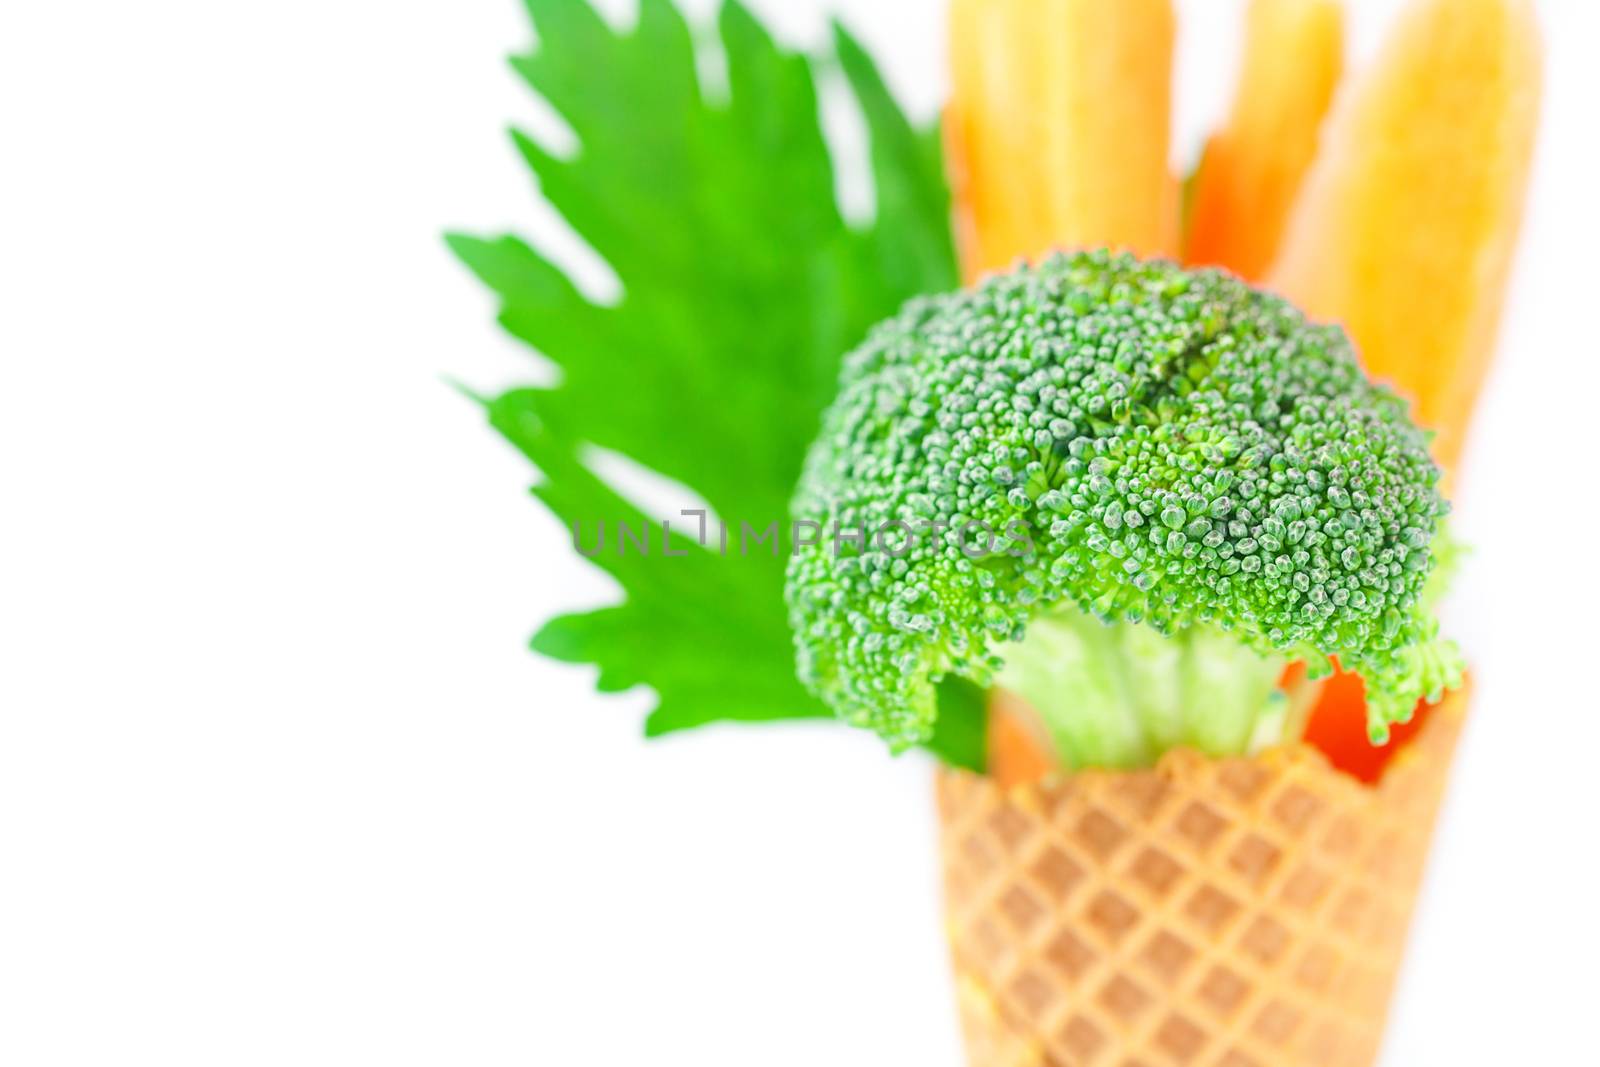 carrot, celery, broccoli in a waffle cone isolated on white by jannyjus